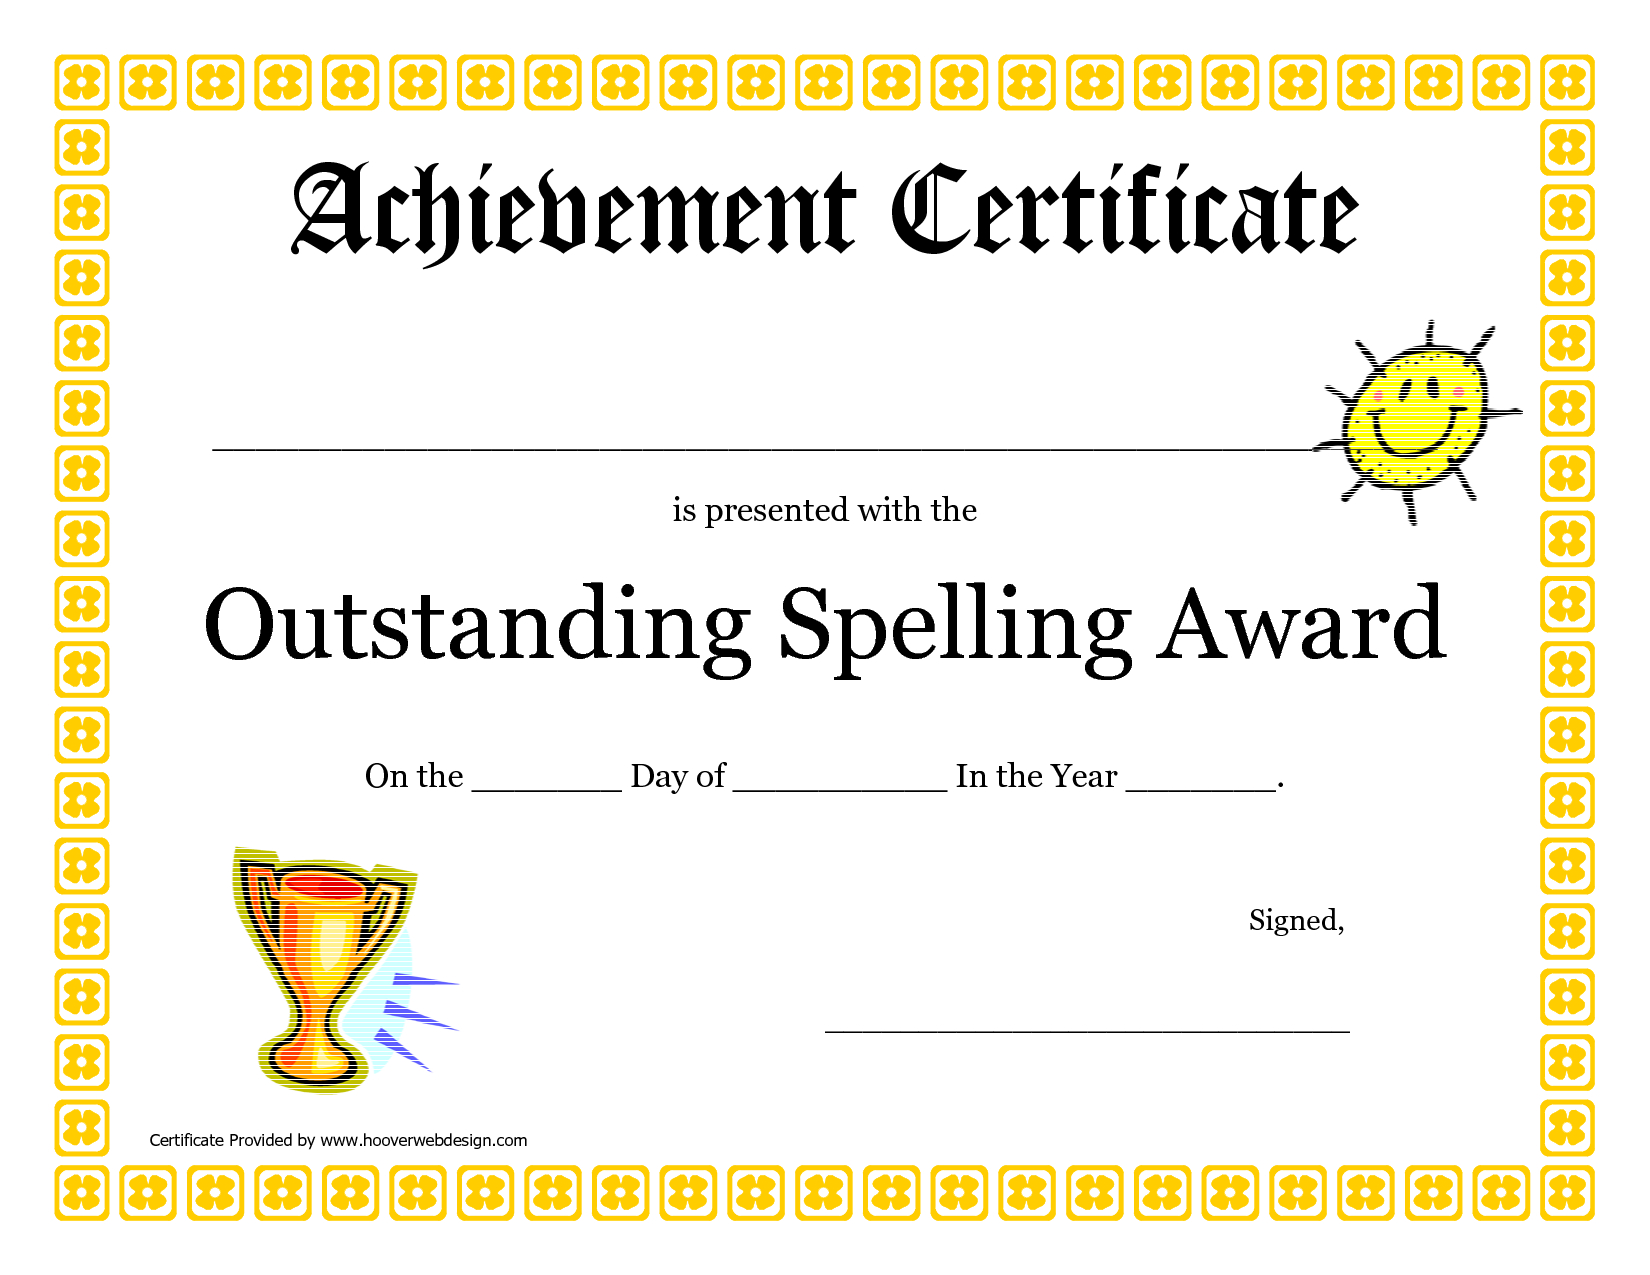 Outstanding Spelling Award Printable Certificate Pdf Picture For Rugby League Certificate Templates